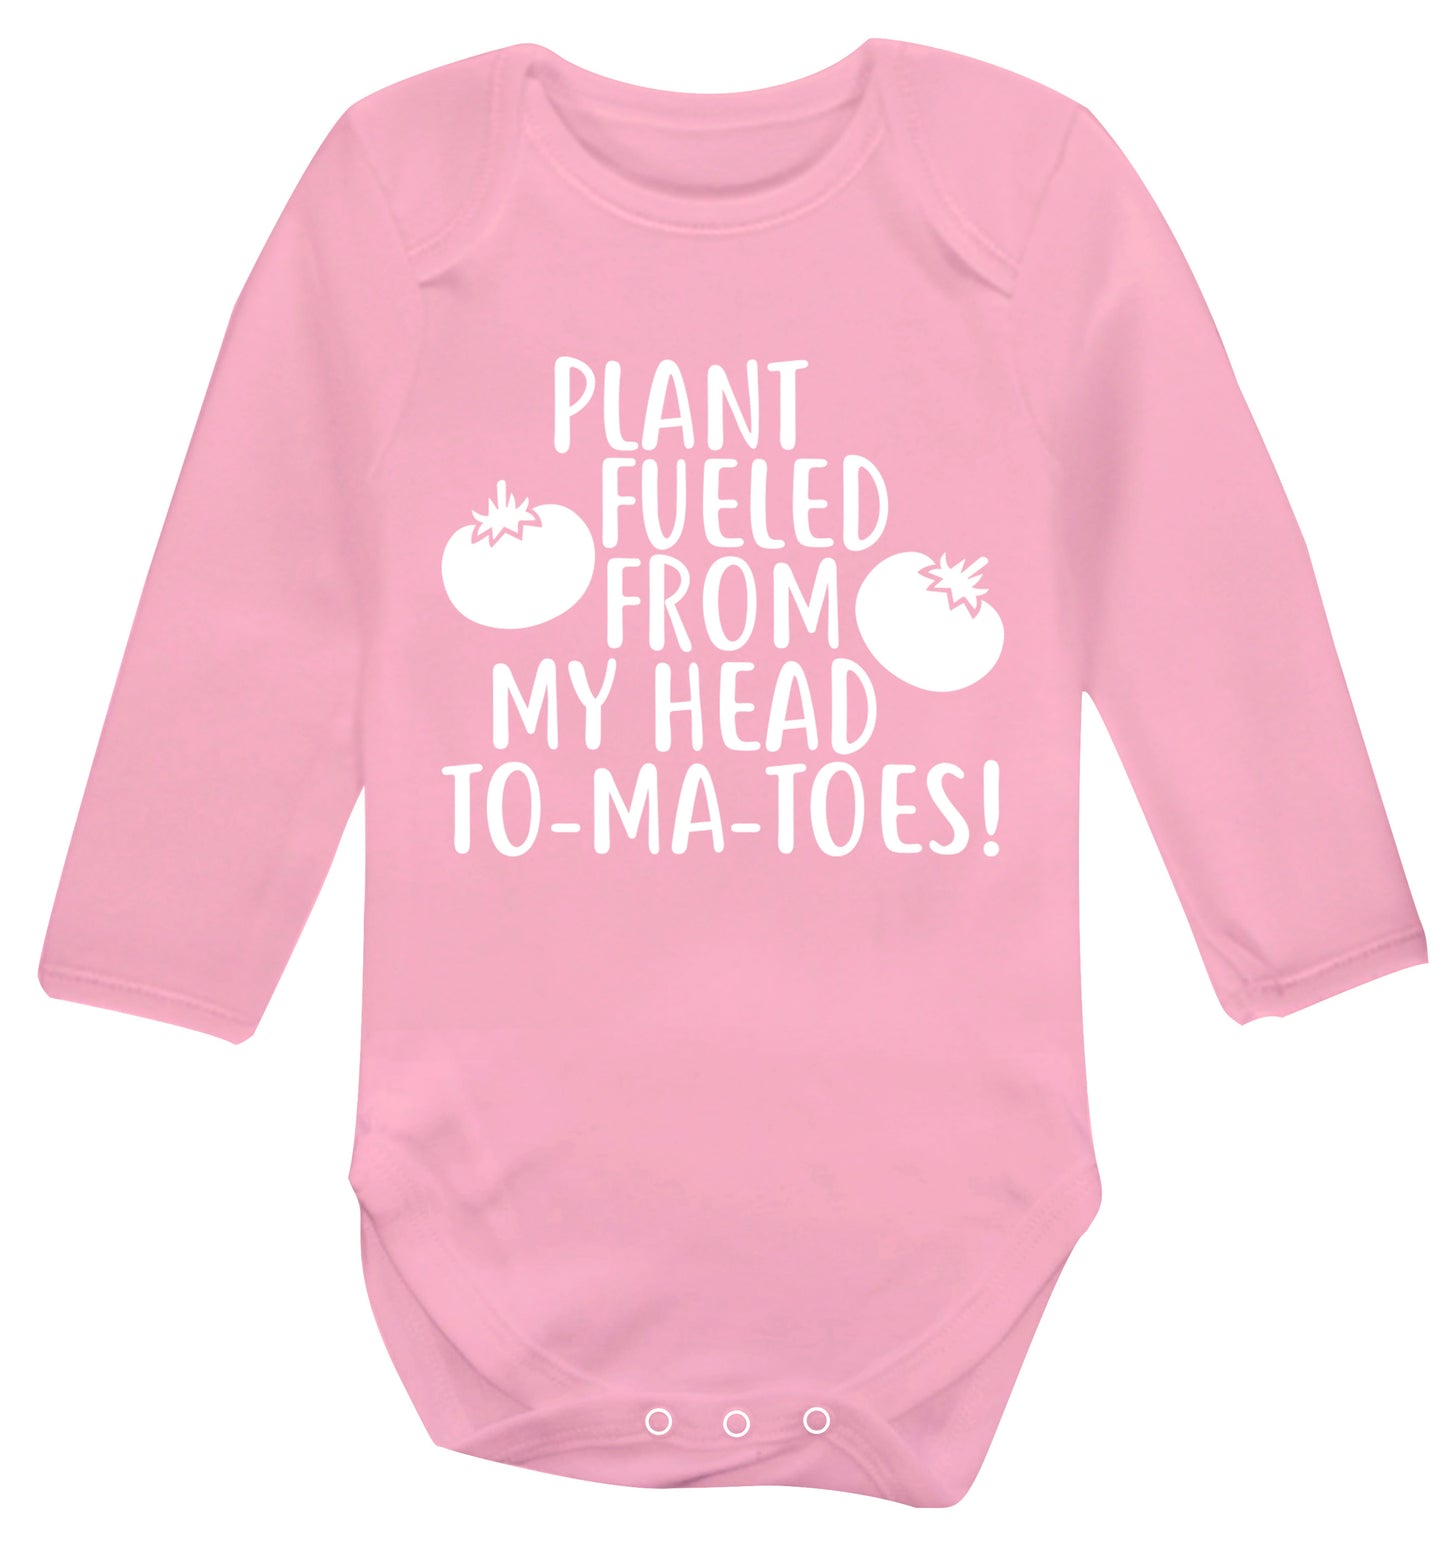 Plant fueled from my head to-ma-toes Baby Vest long sleeved pale pink 6-12 months